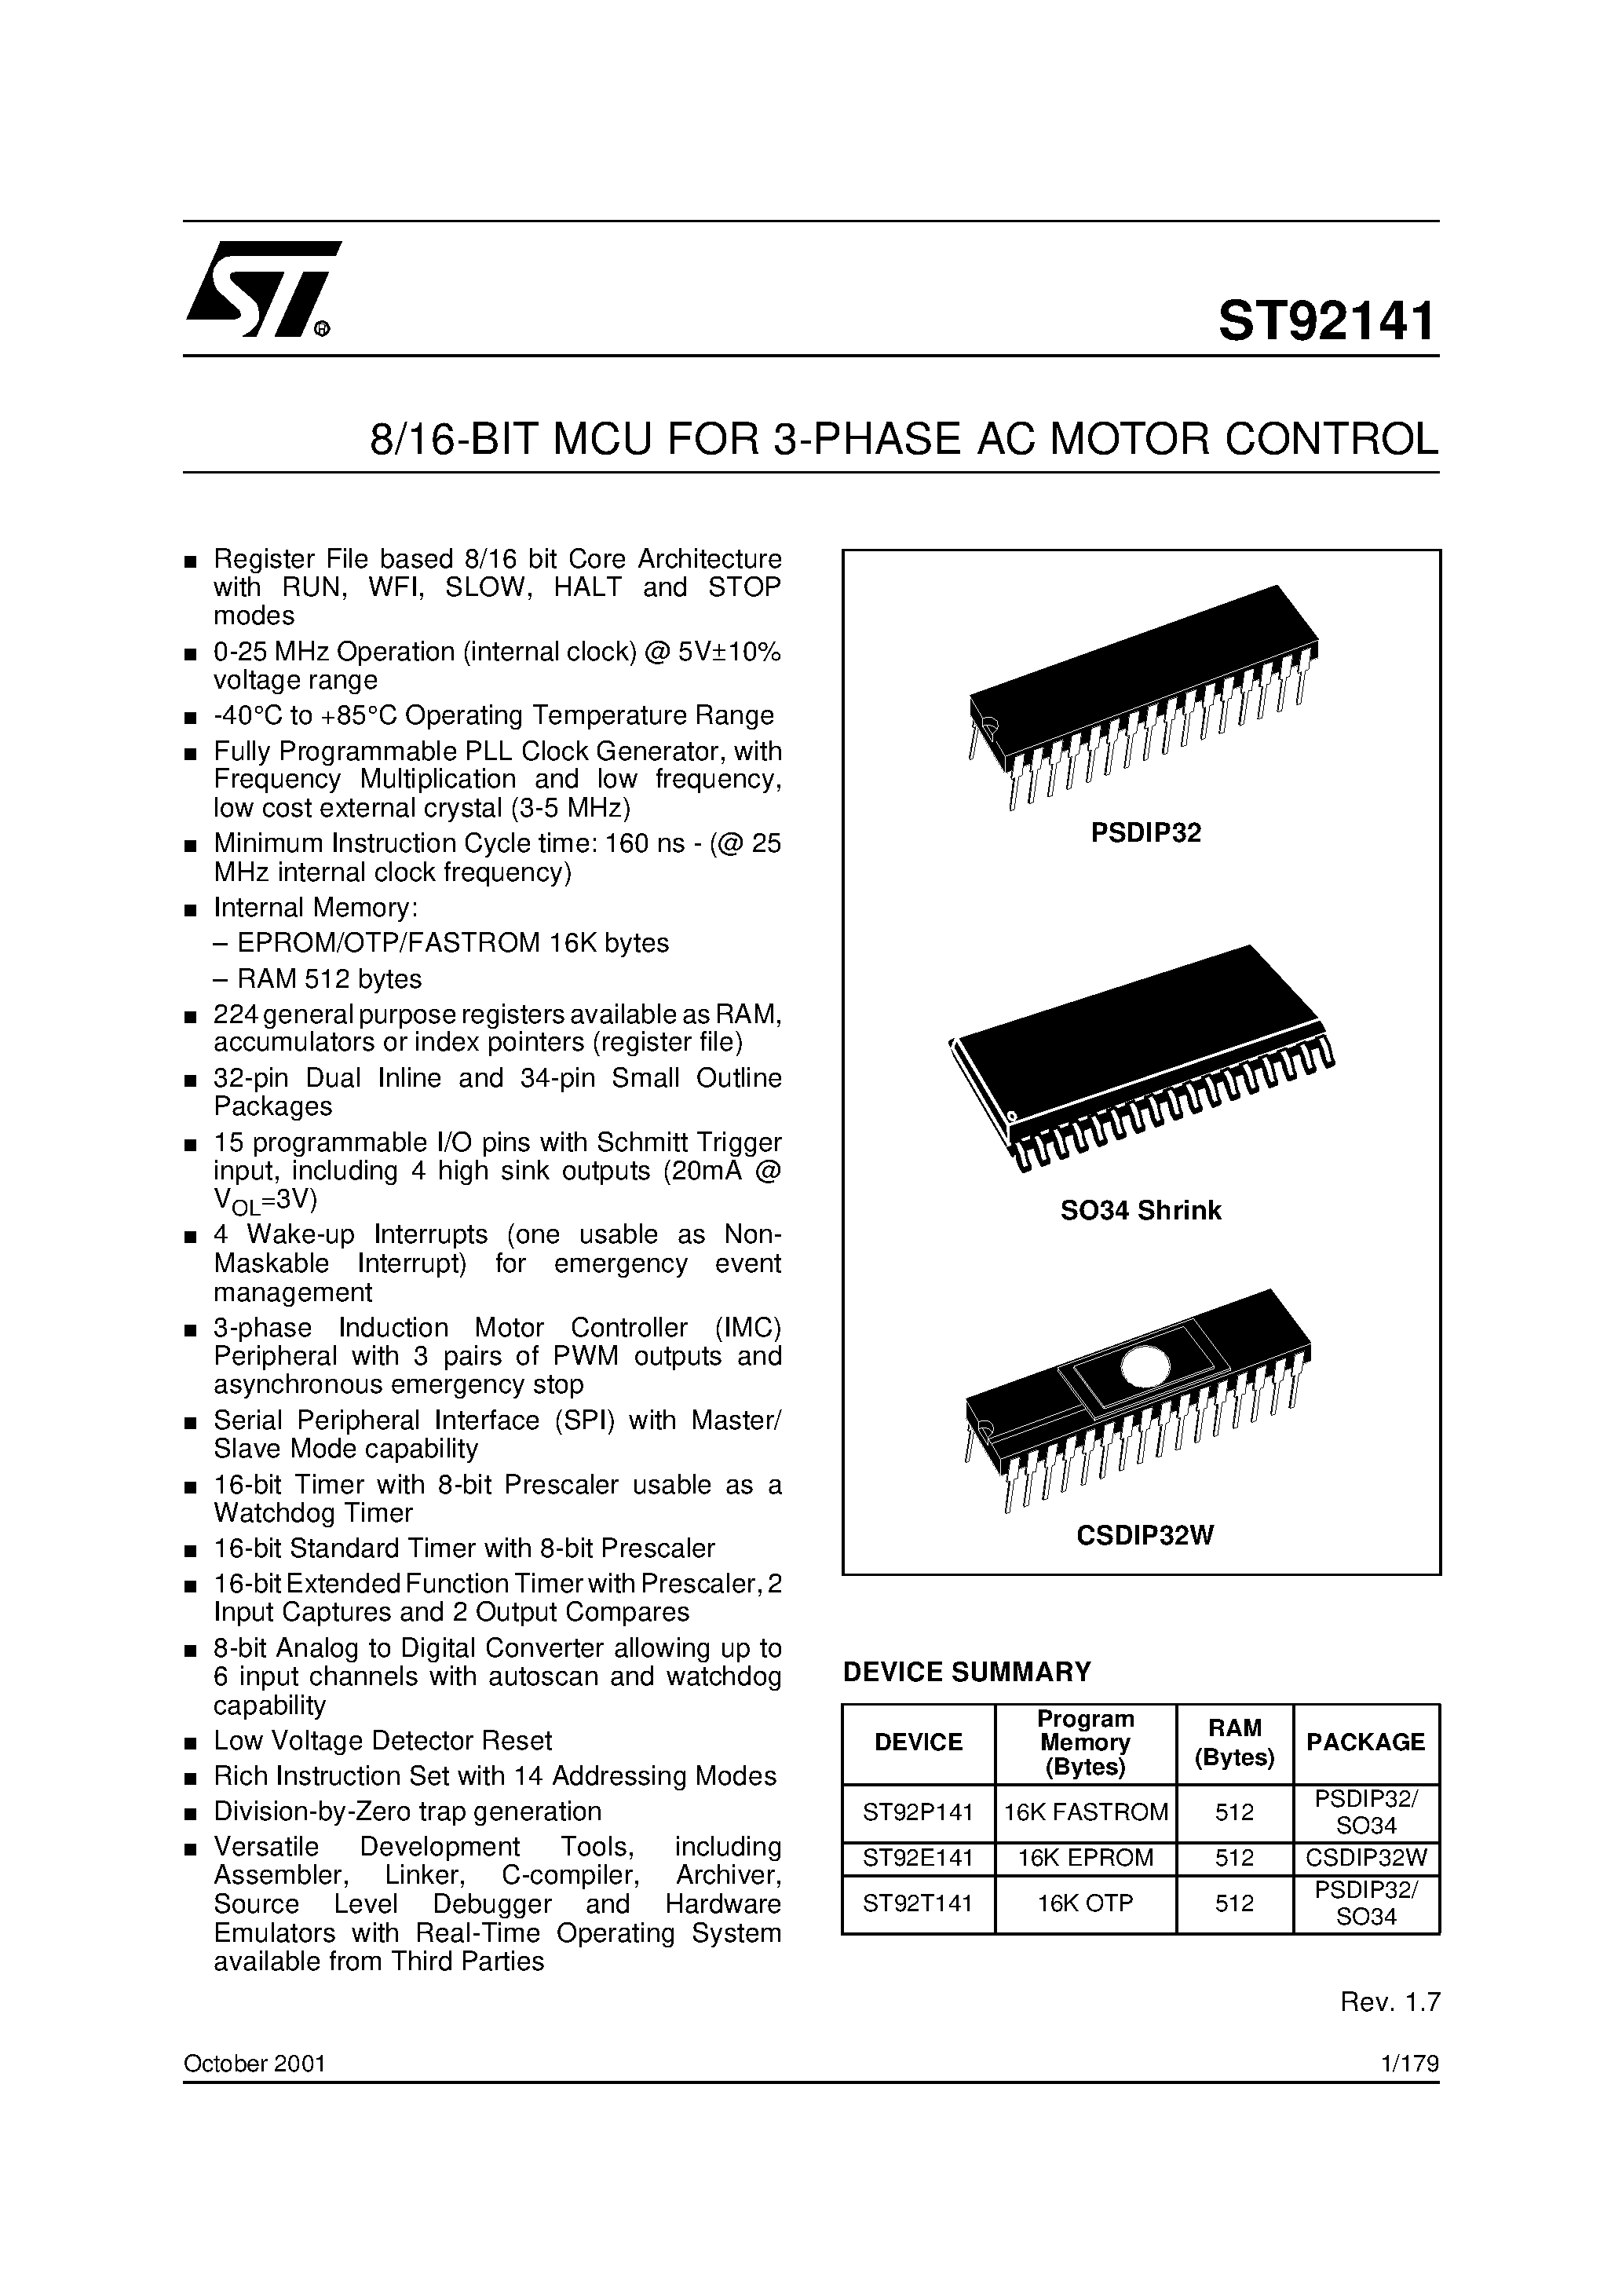 Datasheet ST92141 - 8/16-BIT MCU FOR 3-PHASE AC MOTOR CONTROL page 1